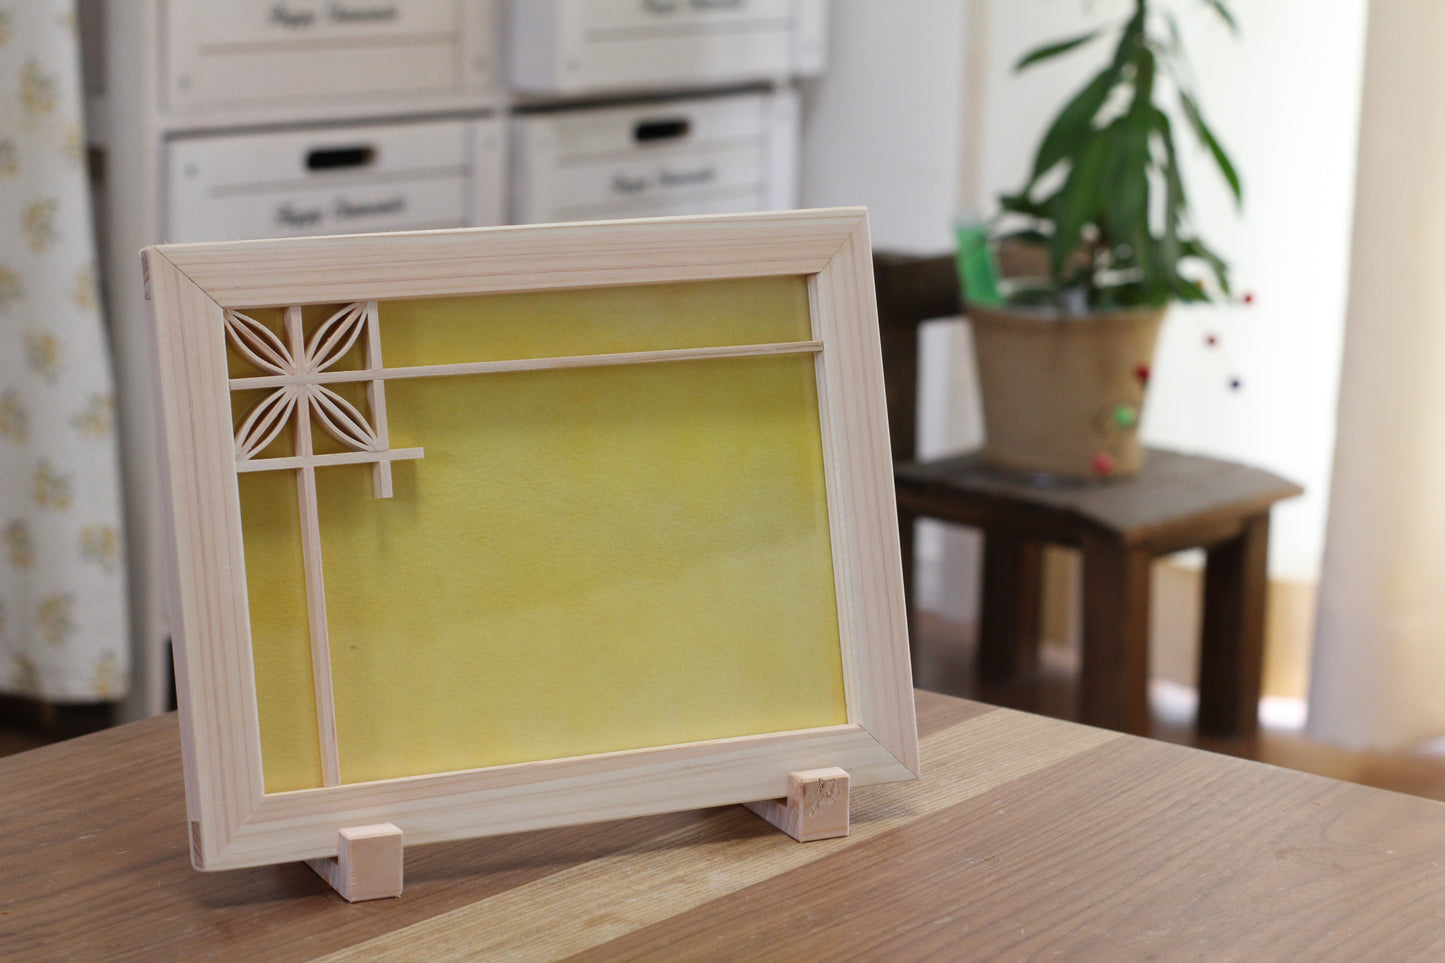 Wooden photo frame cloisonne yellow Japanese paper